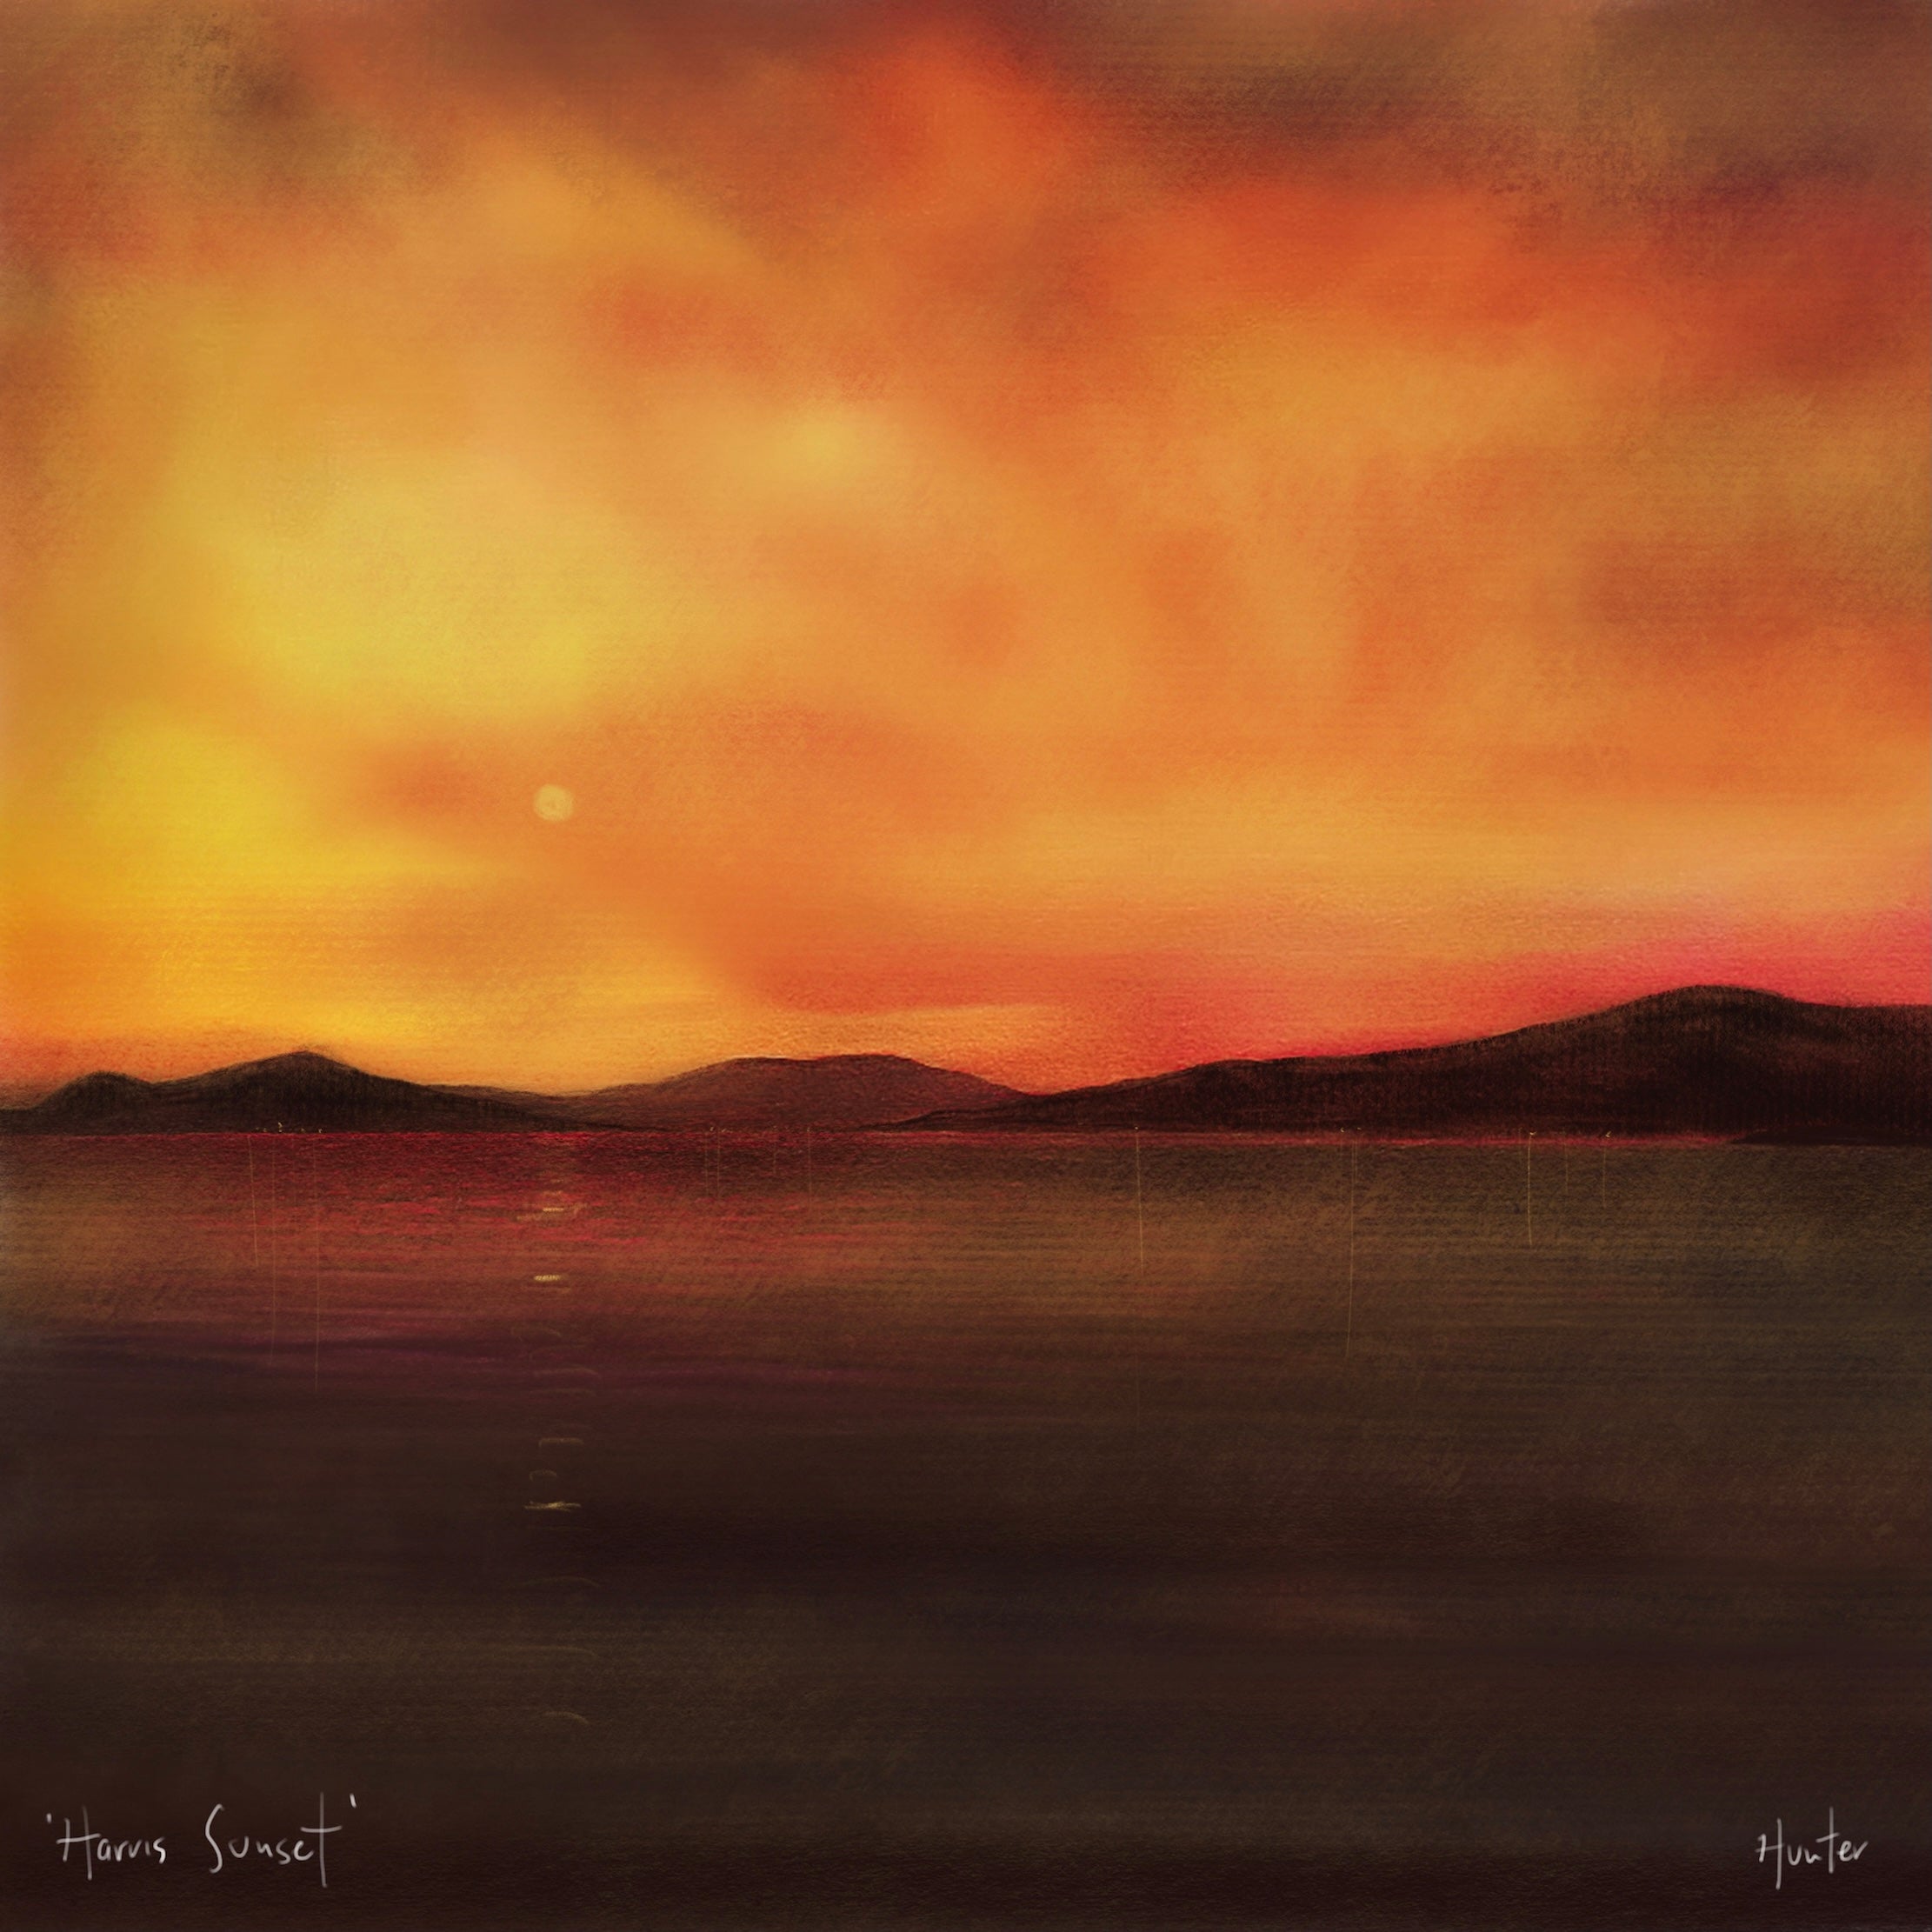 Harris Sunset | Scotland In Your Pocket Art Print-Scotland In Your Pocket Framed Prints-Hebridean Islands Art Gallery-Paintings, Prints, Homeware, Art Gifts From Scotland By Scottish Artist Kevin Hunter